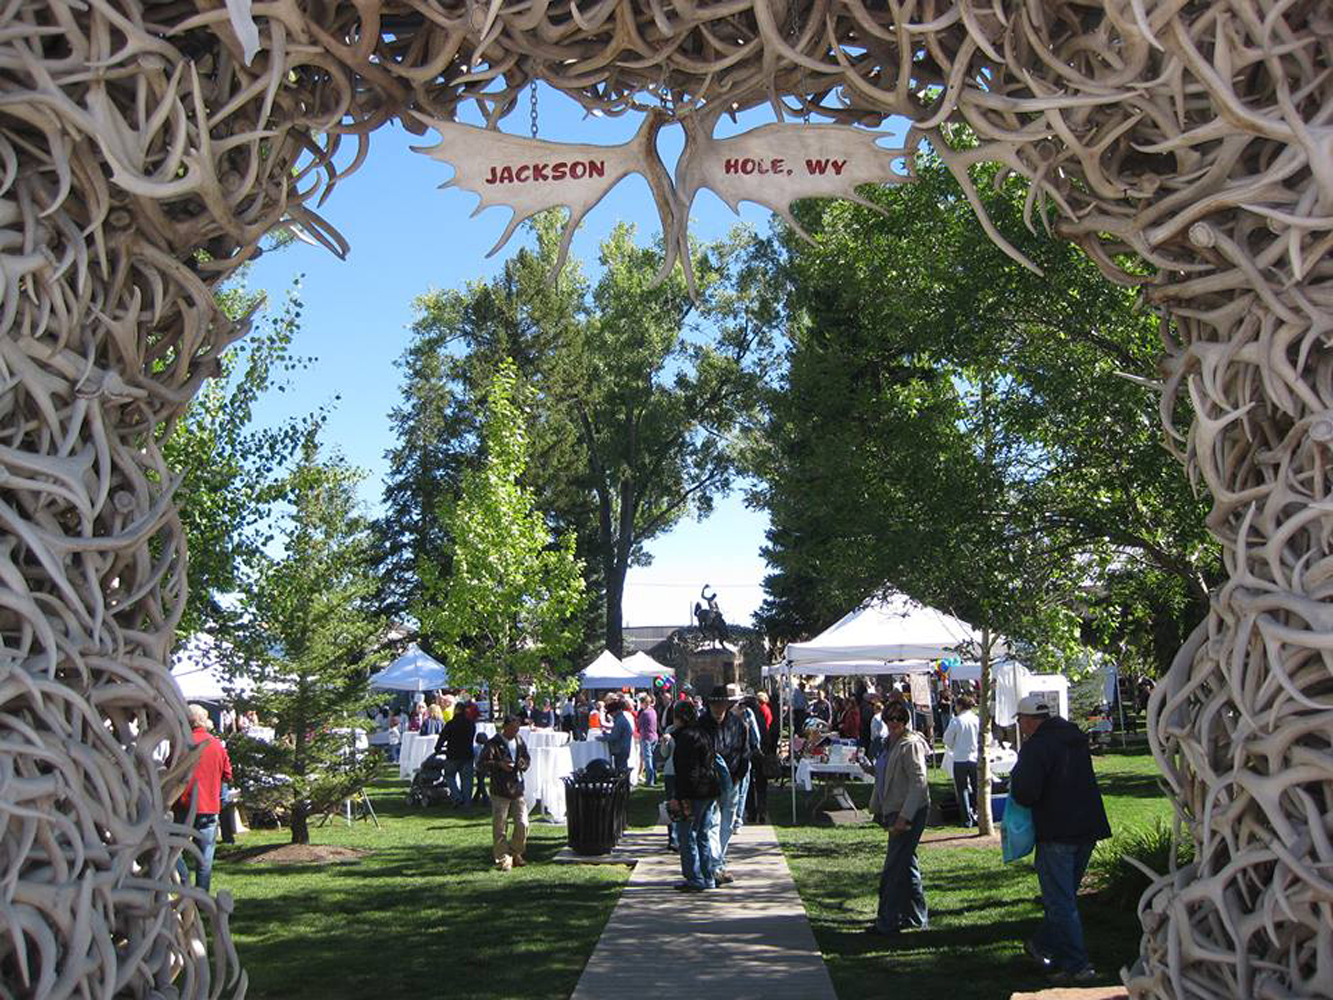 Several Fall Arts Festival events take place in Jackson's famous Town Square, framed by elk antlers.